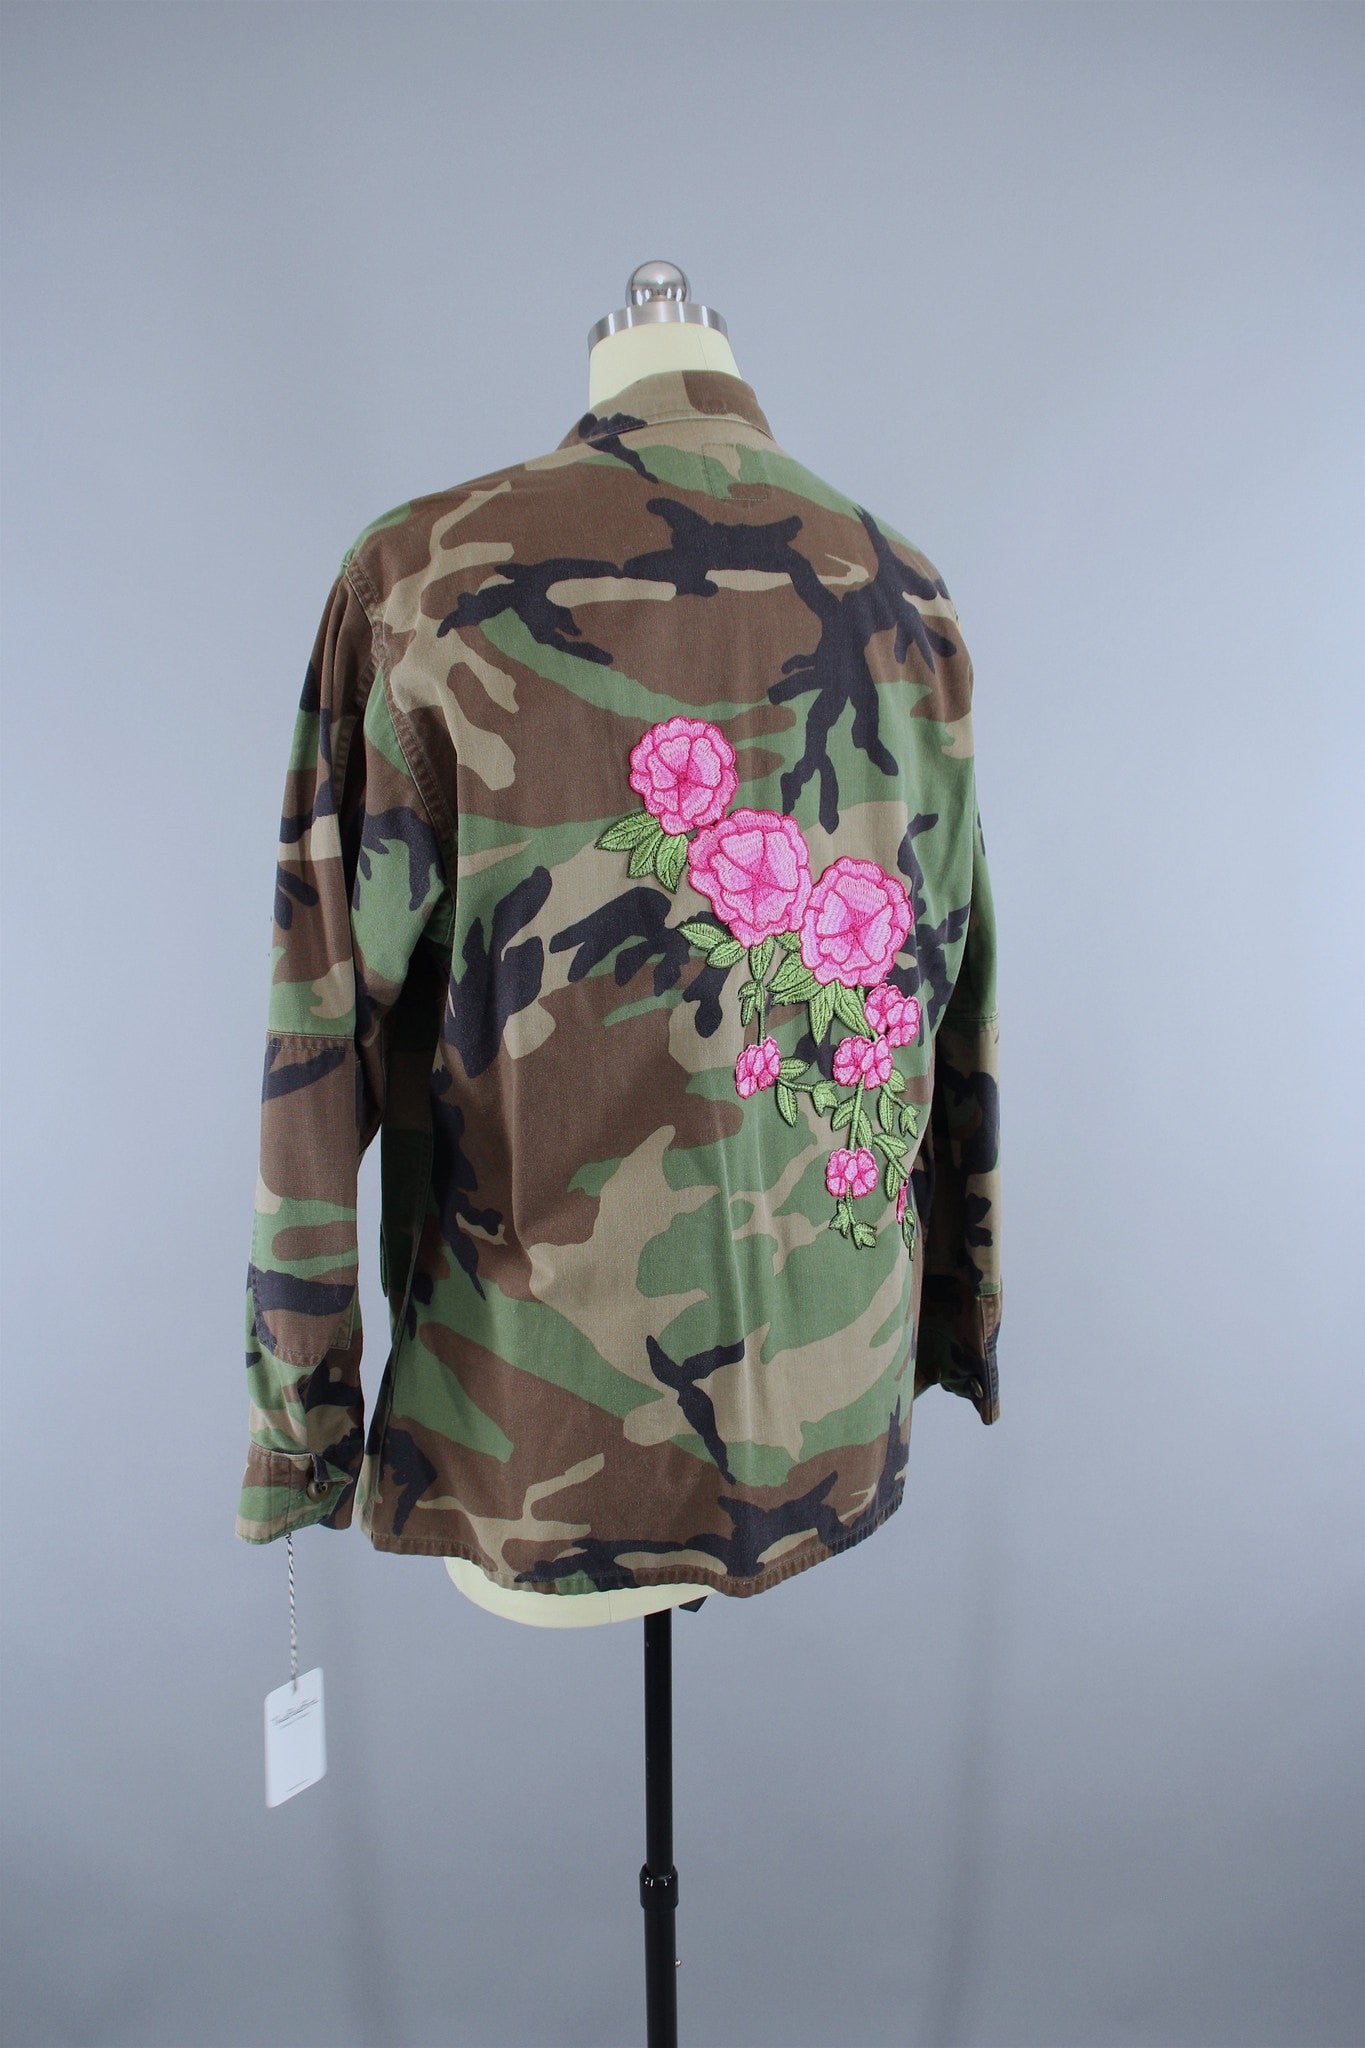 US Army Camouflage Jacket with Pink Floral Embroidery Patch - ThisBlueBird